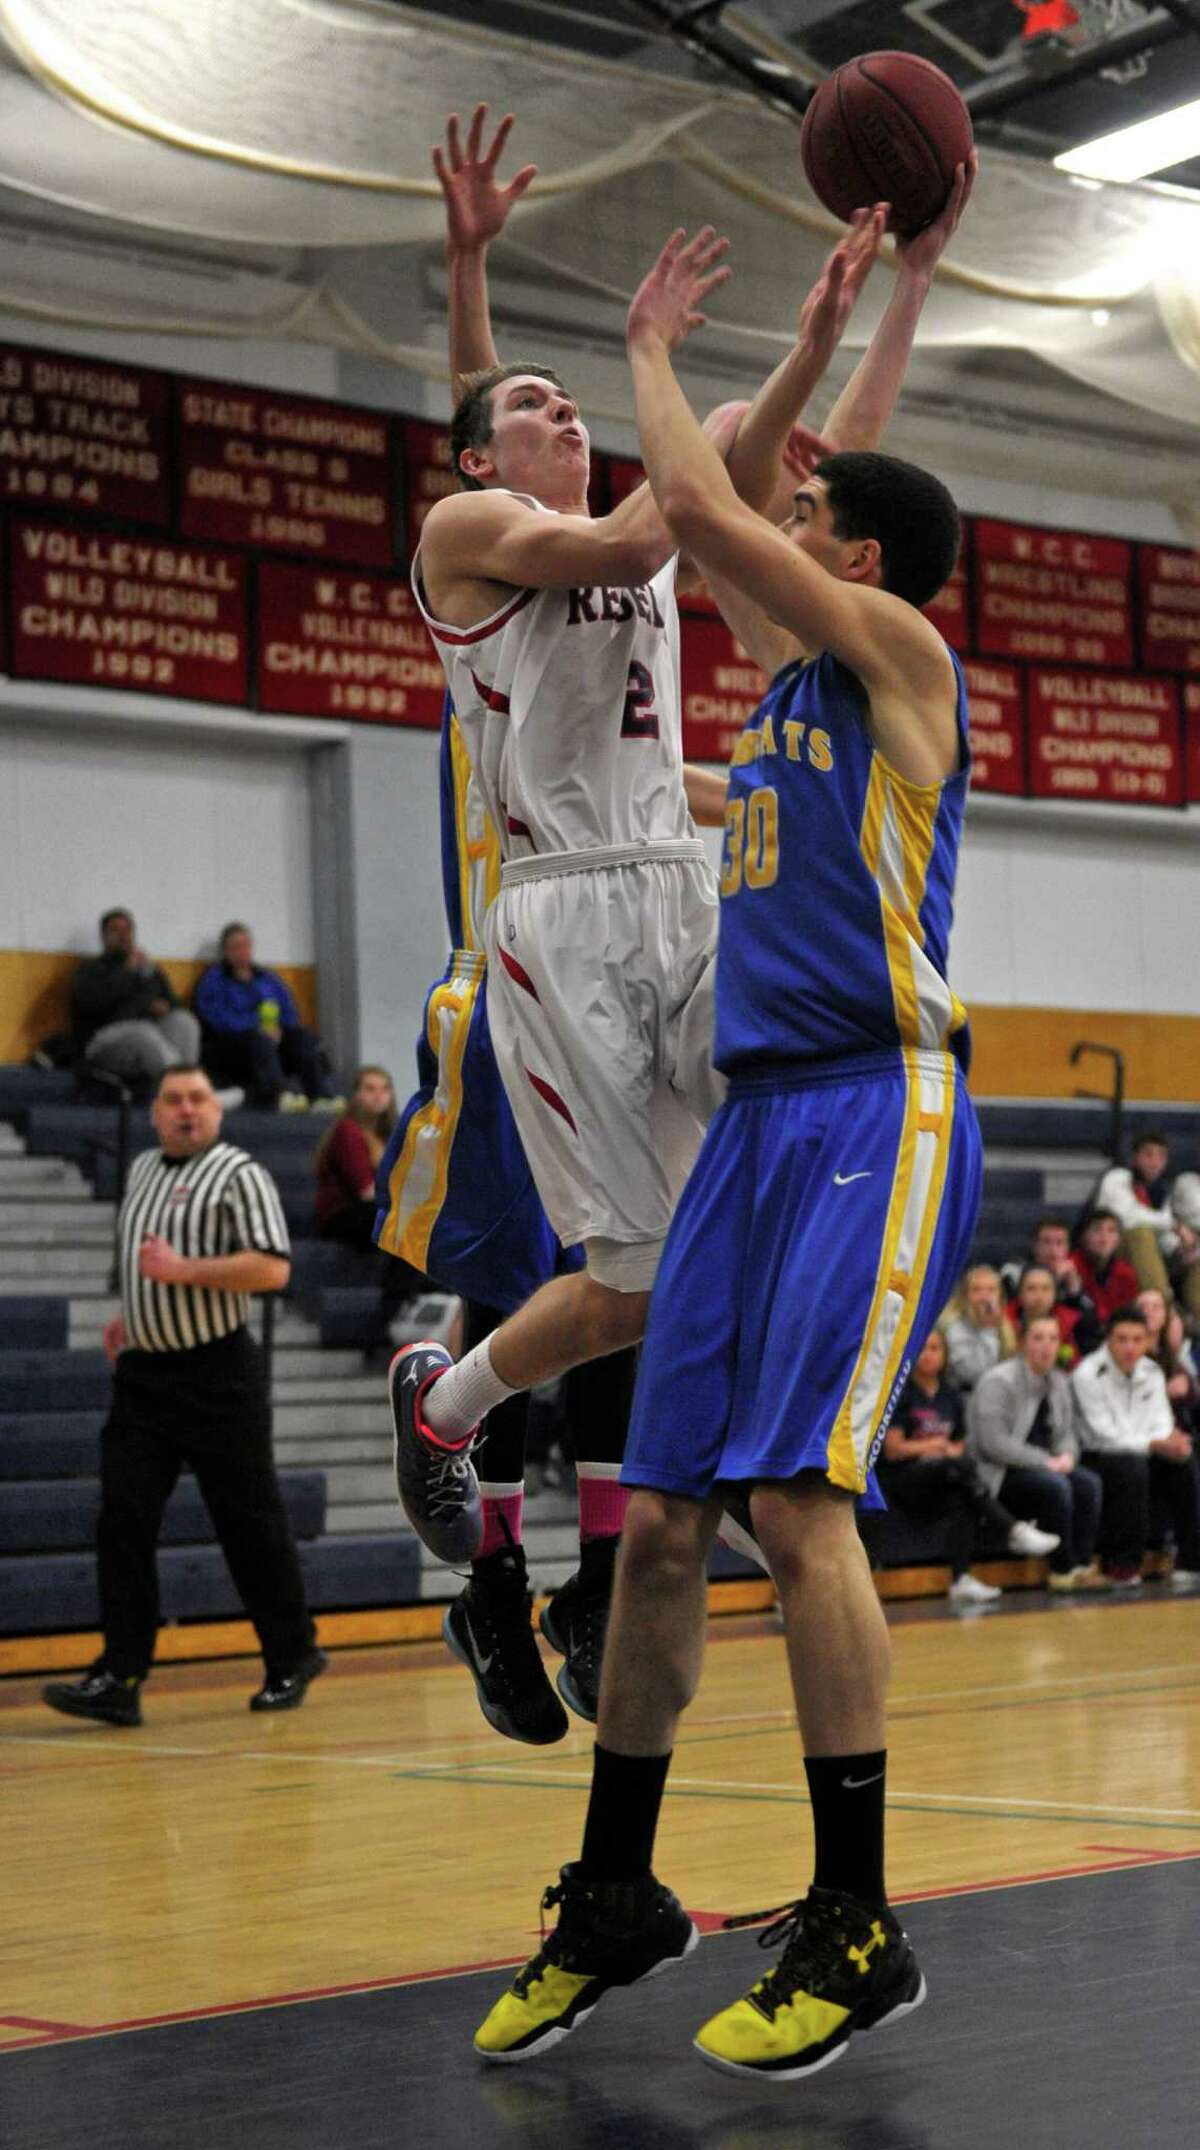 New Fairfield’s Joe Valenti drives to the basket against Brookfield’s Nick Lopez during the Rebels’ 56-53 victory on Thursday at New Fairfield.